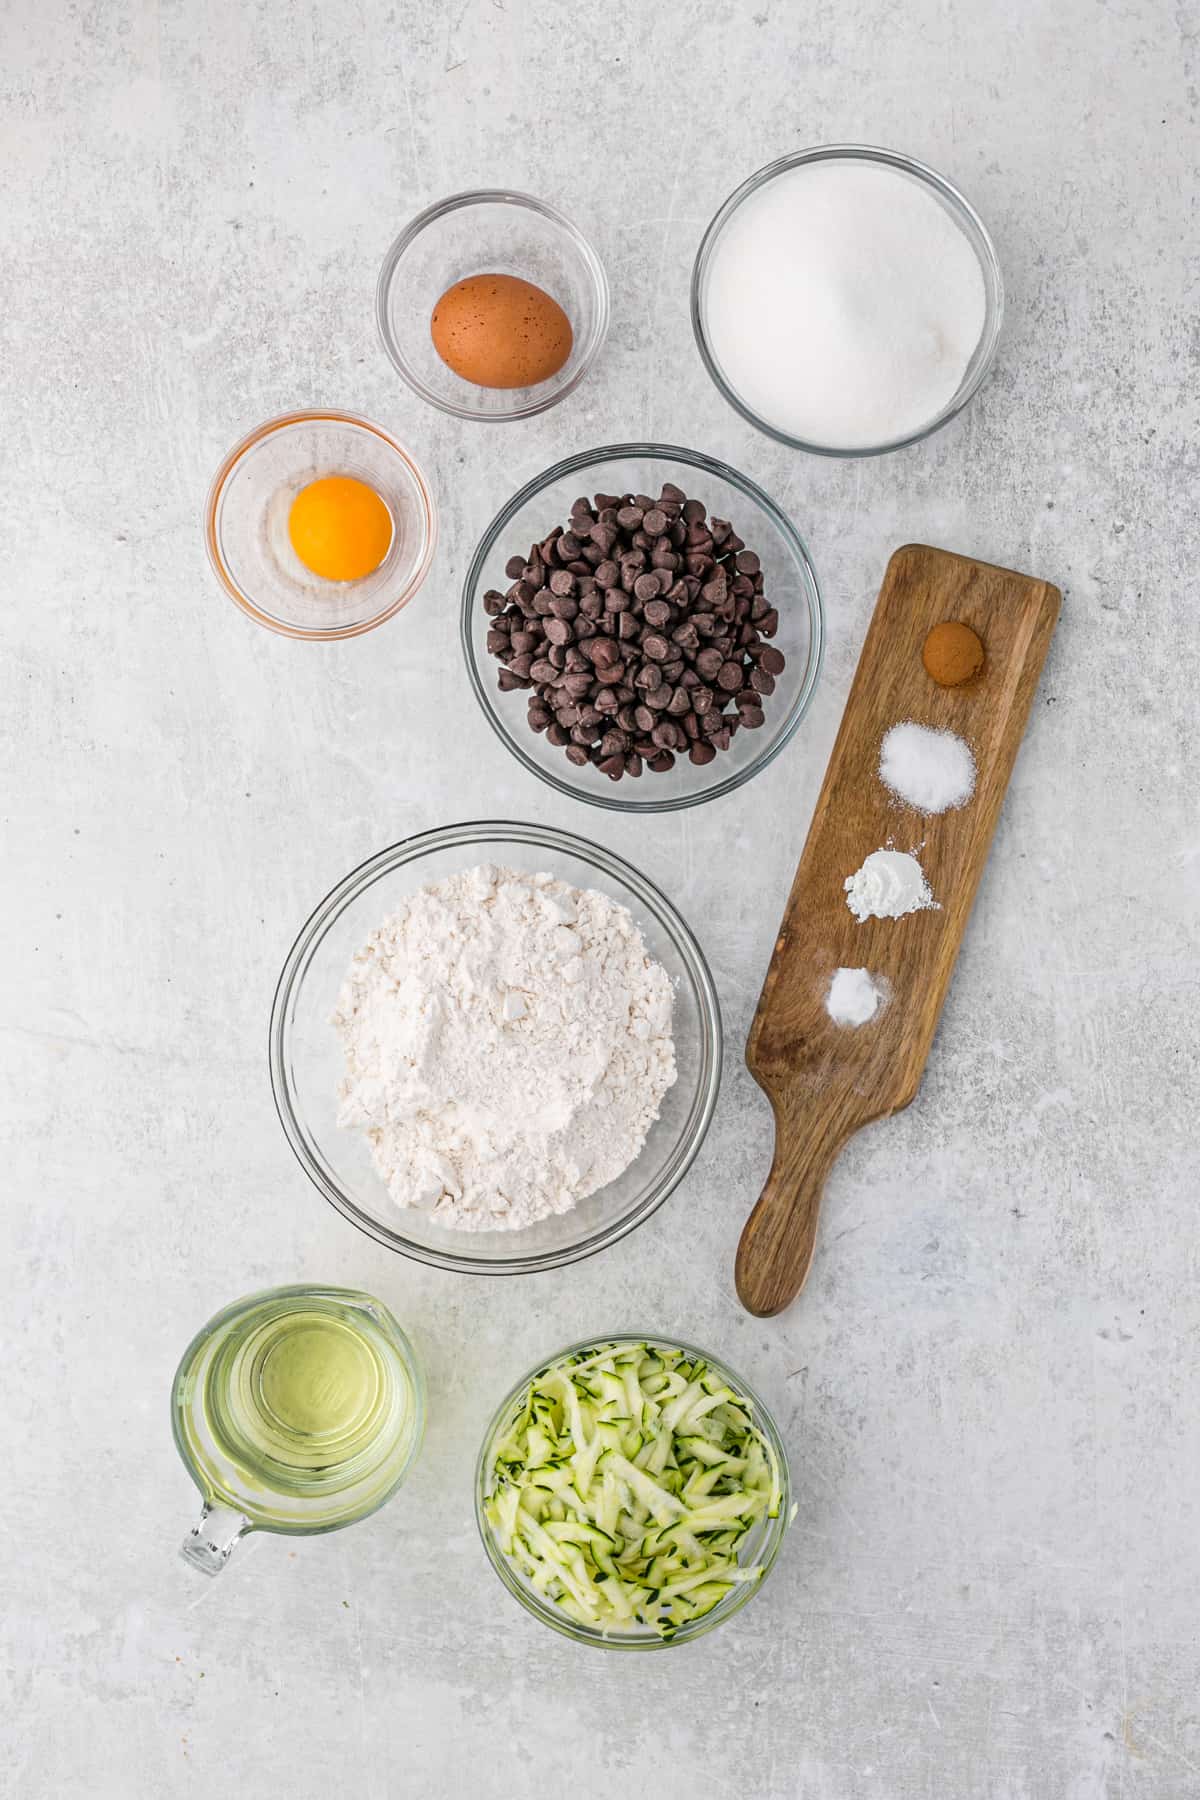 Ingredients to make chocolate chip zucchini bread set in small bowls.